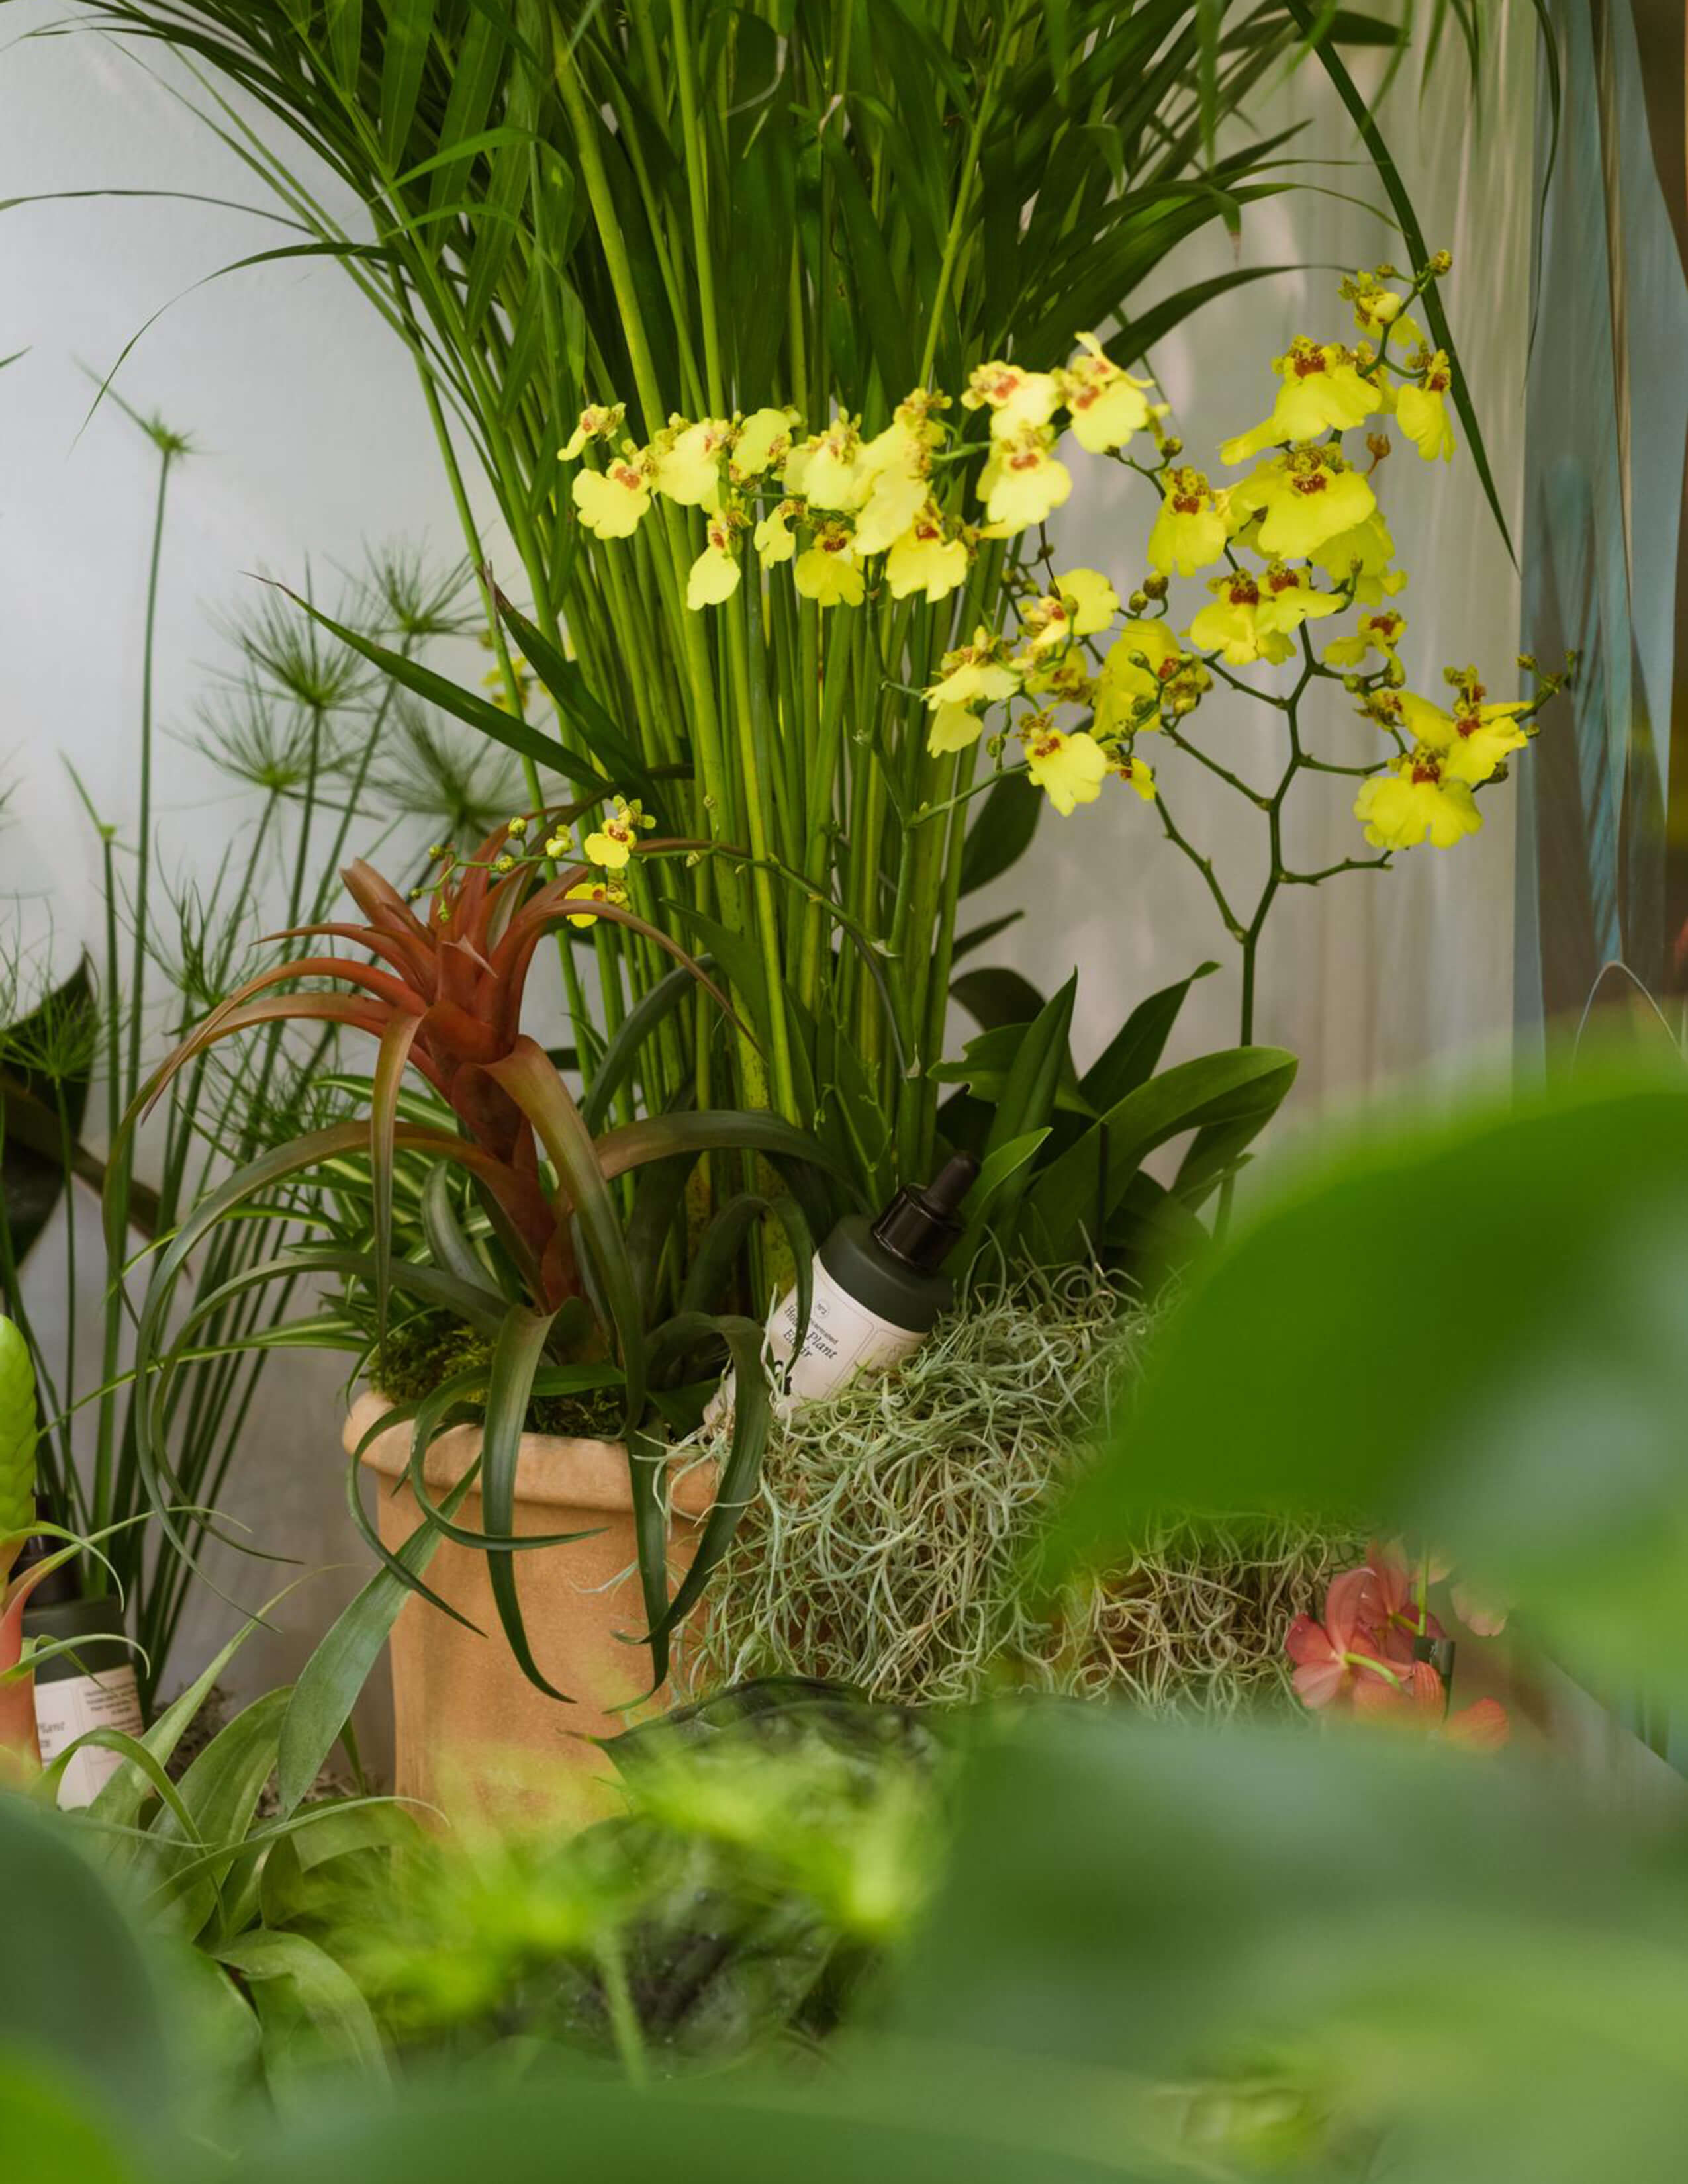 The Sowvital house plant products sit among various kinds of plants, like Guzmania, Dancing Lady, etc.